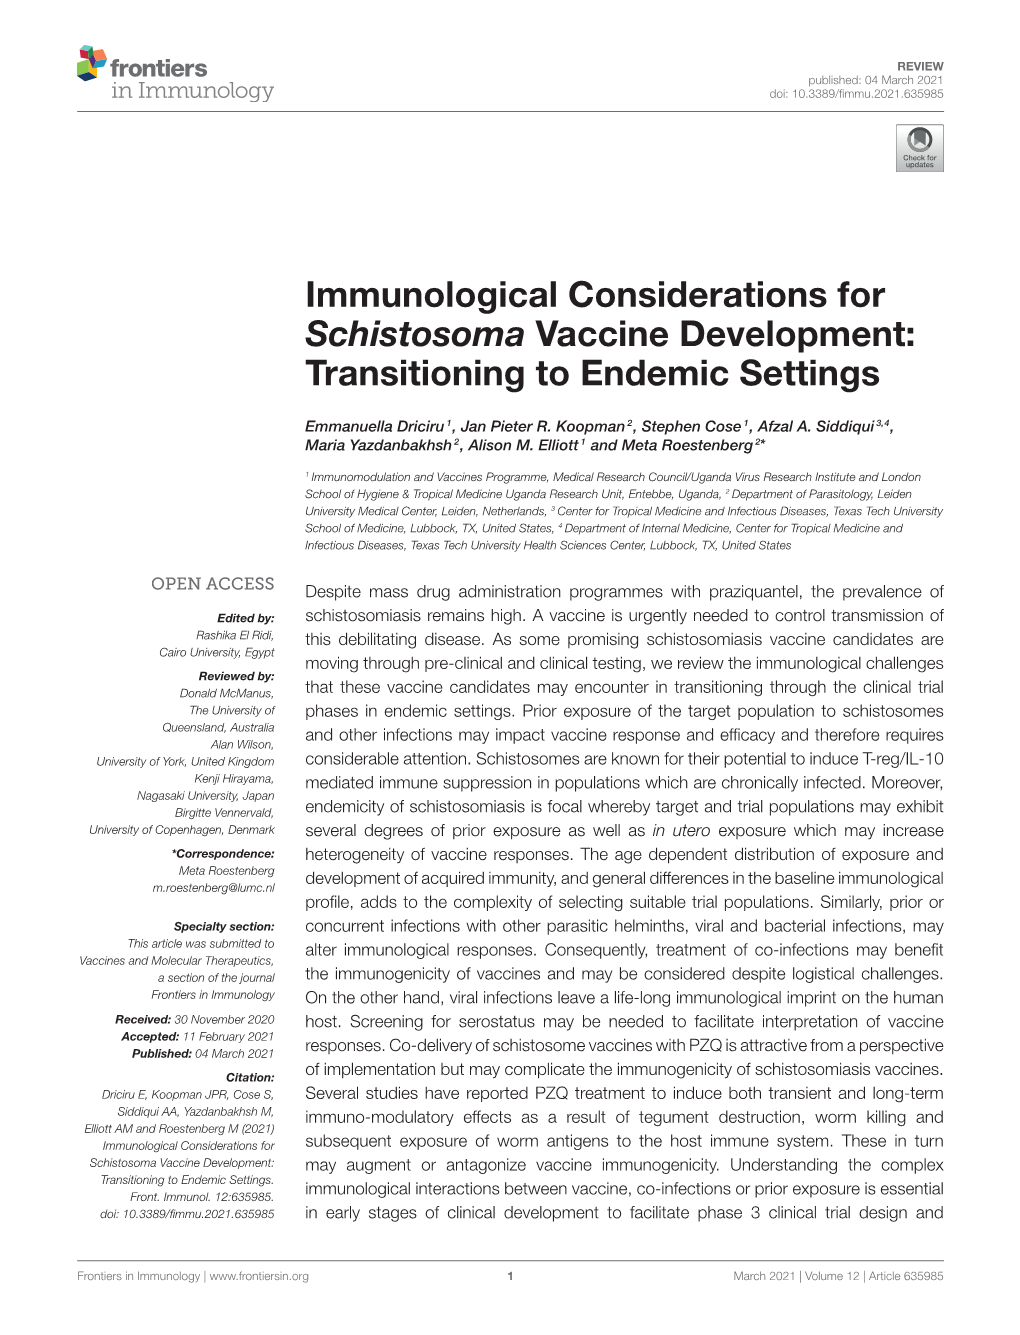 Immunological Considerations for Schistosoma Vaccine Development: Transitioning to Endemic Settings